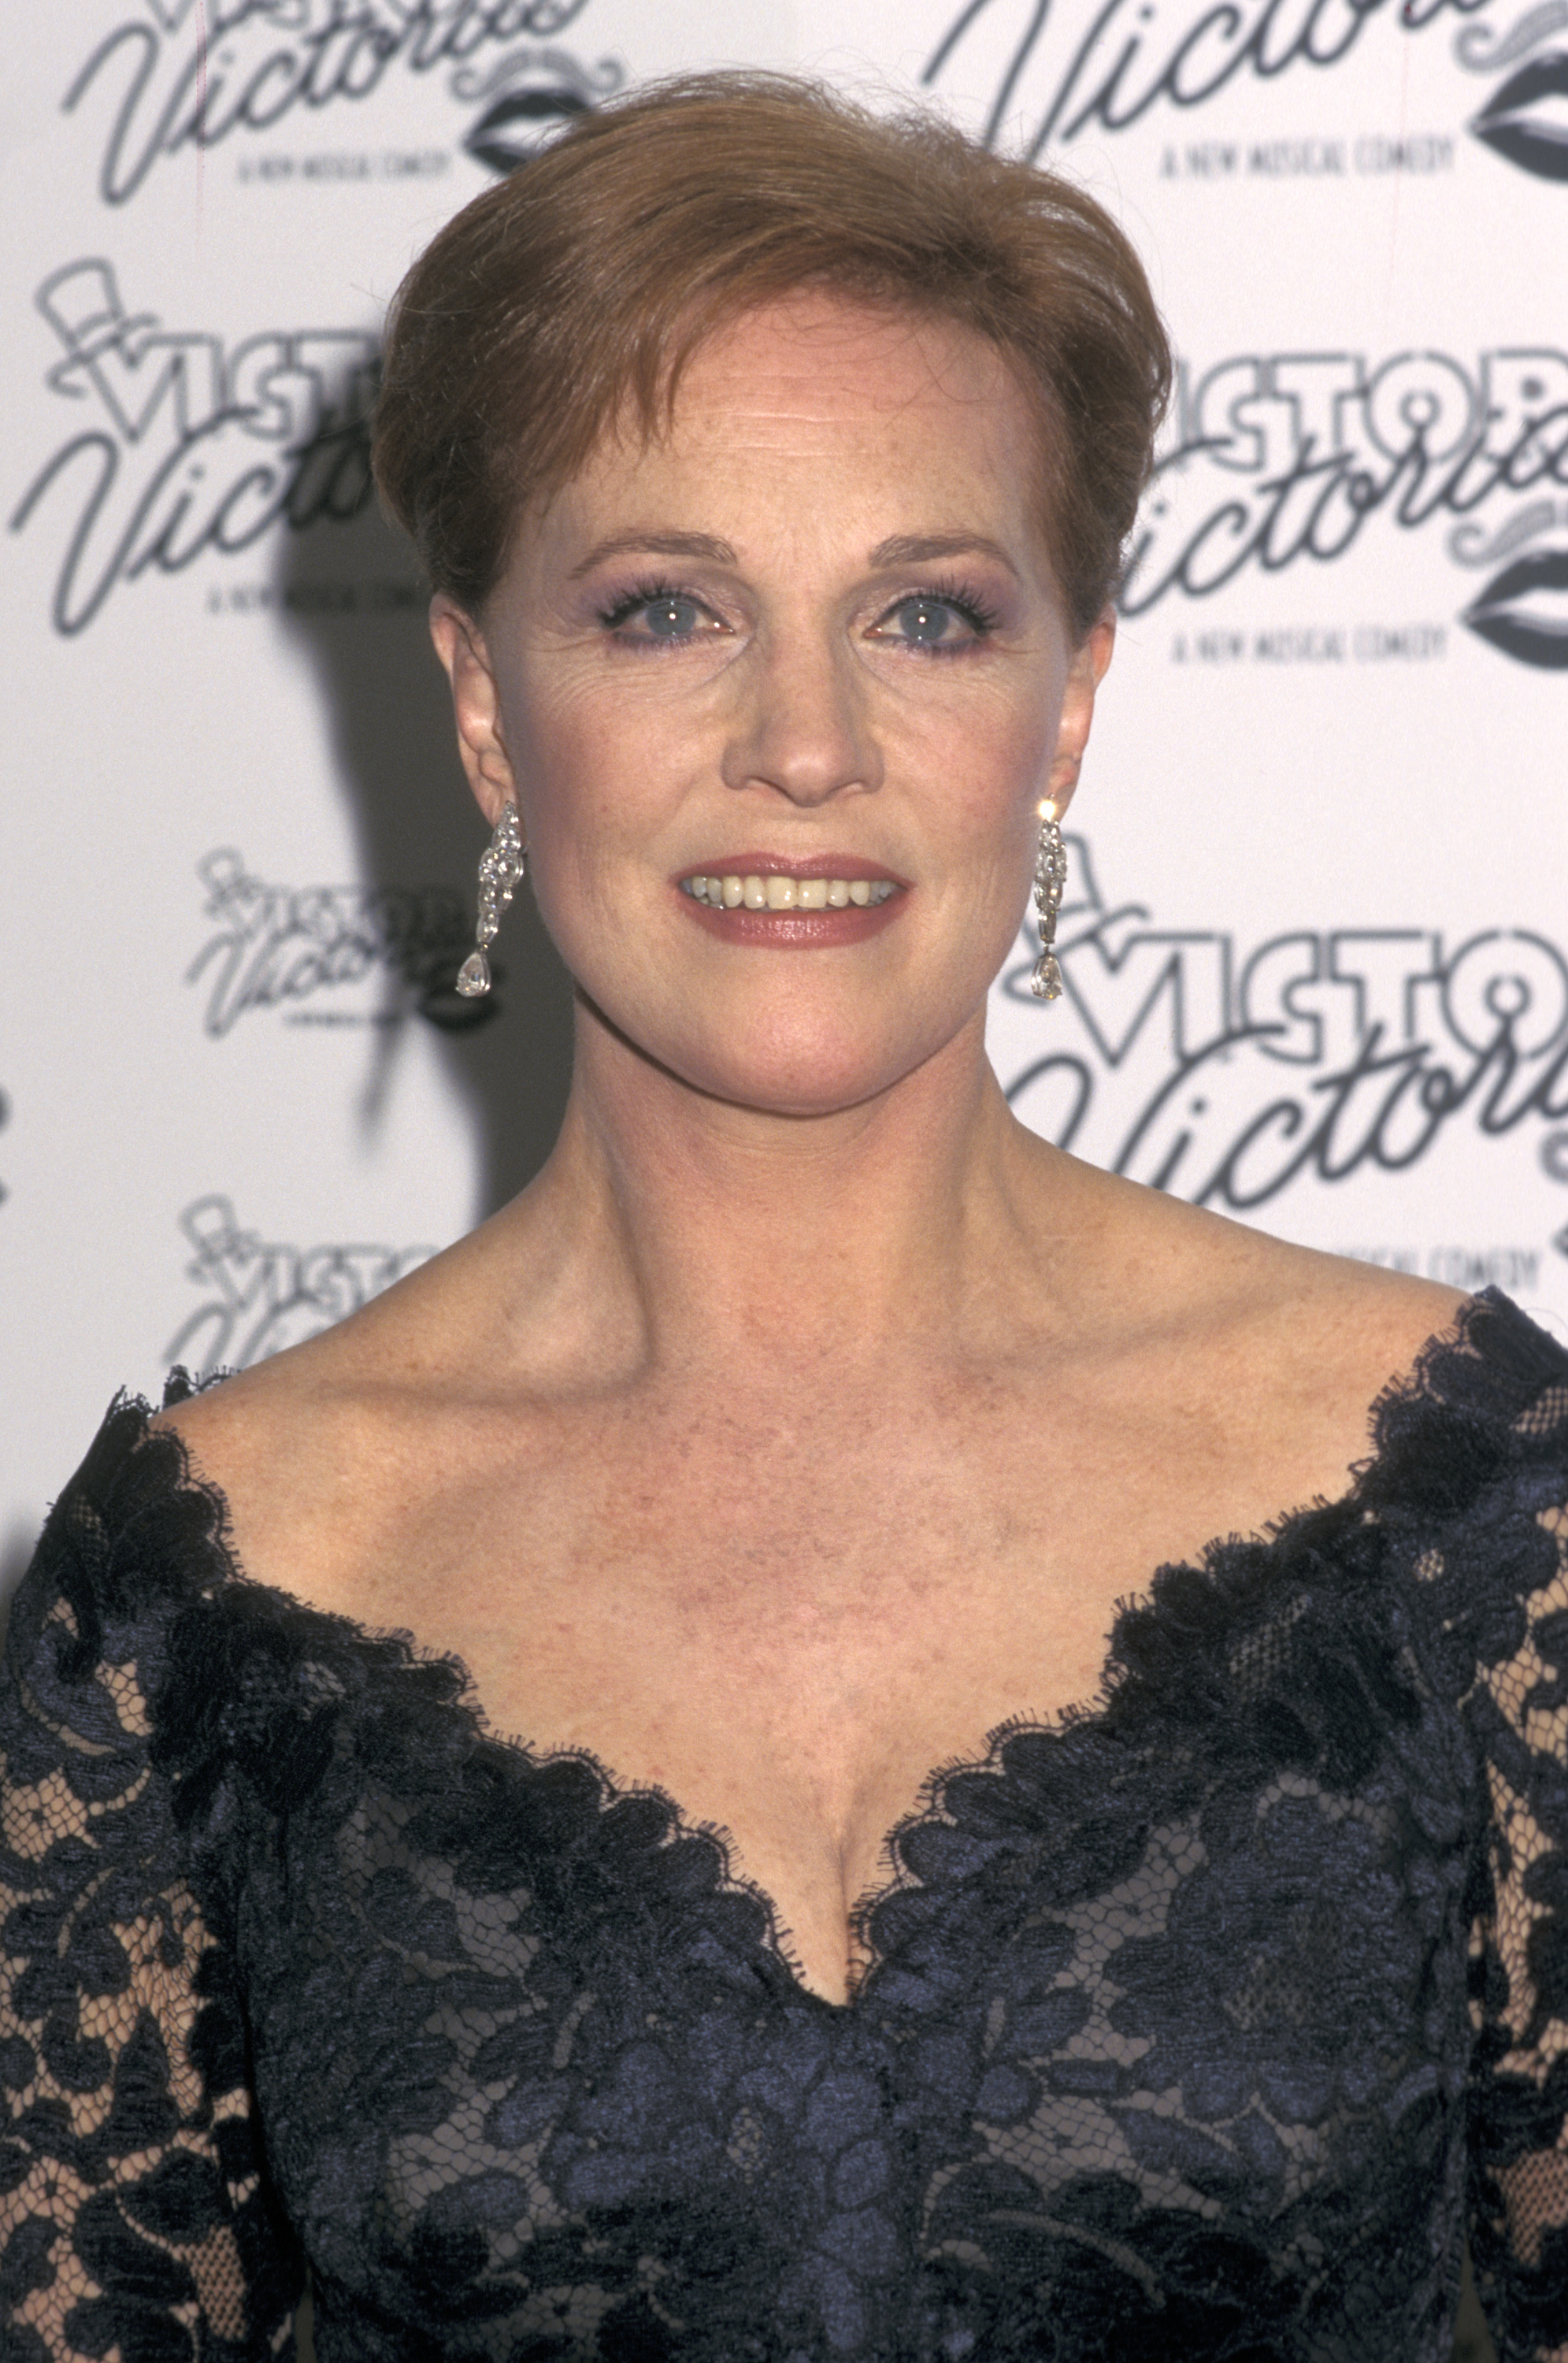 Julie Andrews at the Broadway opening of "Victor/Victoria" on October 25, 1995, in New York City. | Source: Getty Images